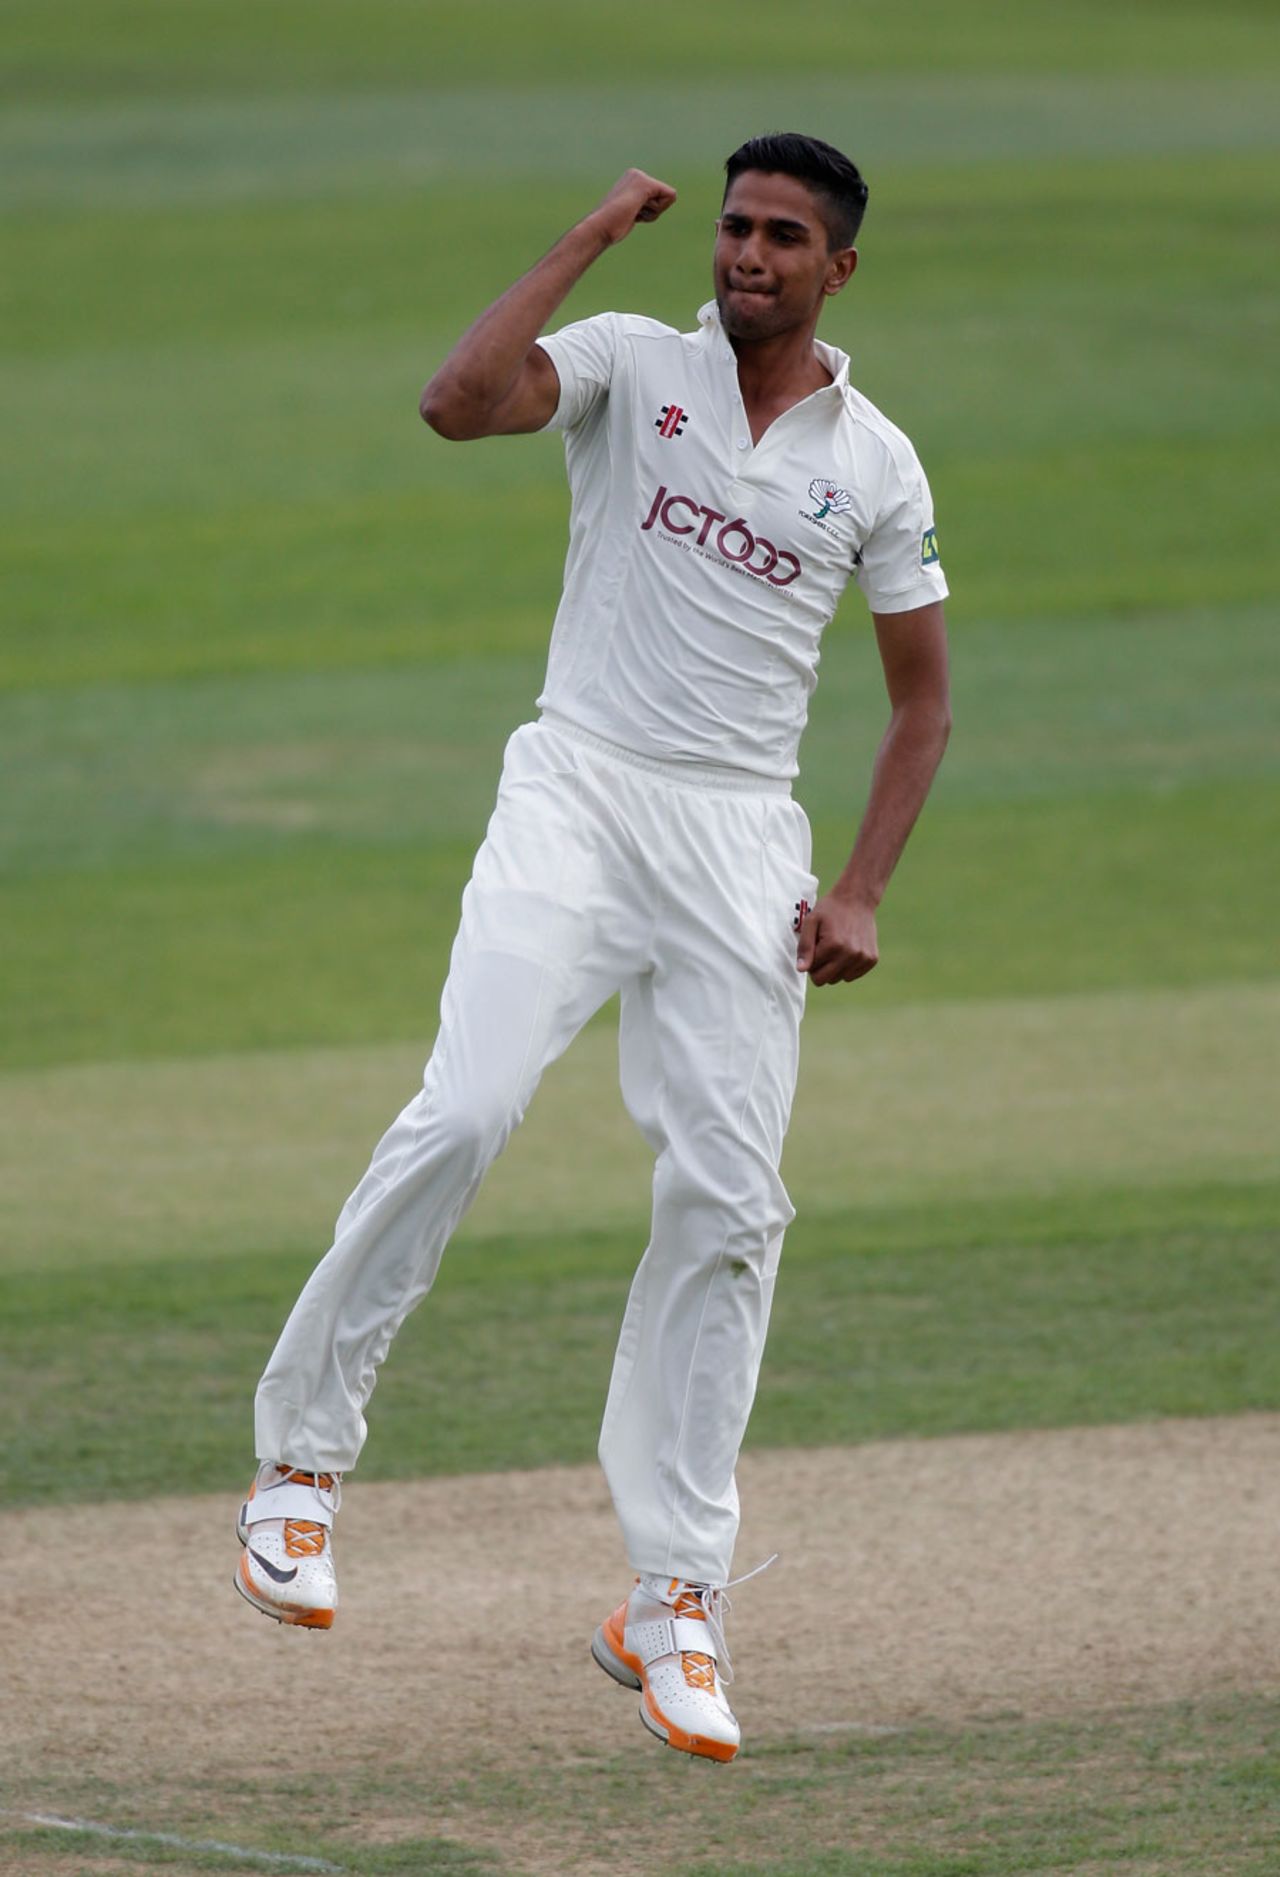 Moin Ashraf claimed 4 for 36, County Championship, Division Two, Chelmsford, 2nd day, September 12, 2012